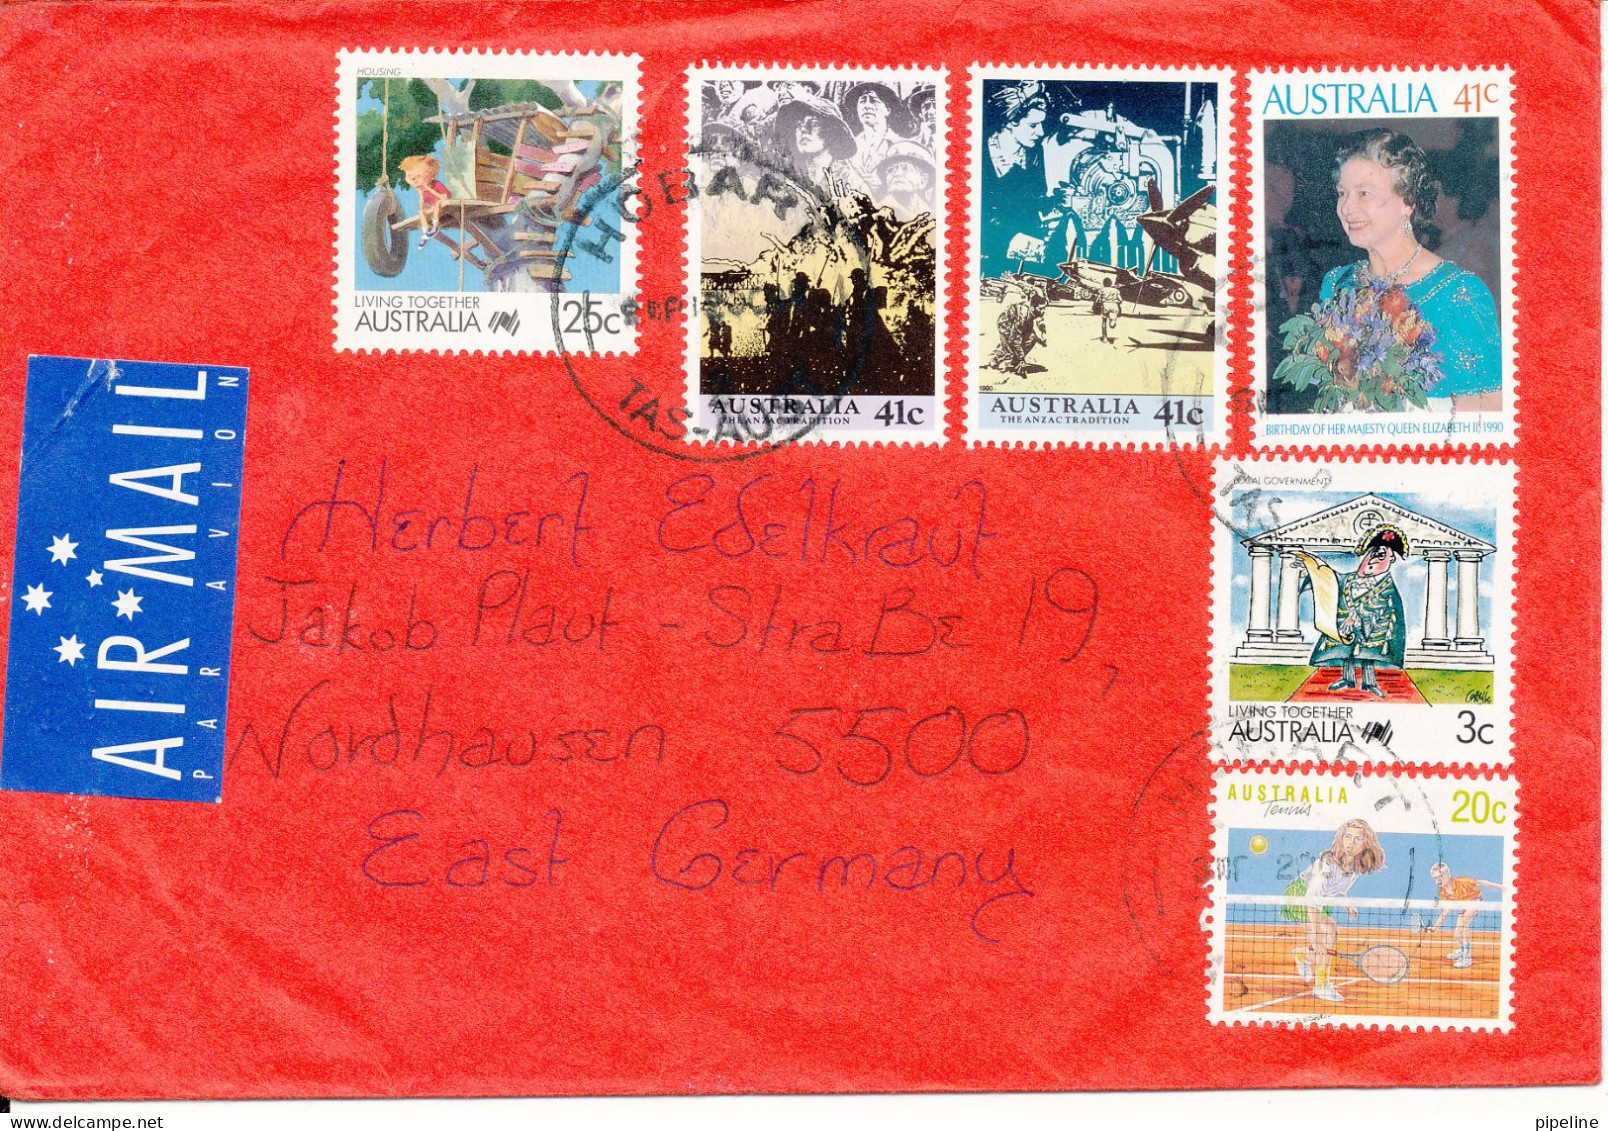 Australia Cover Sent Air Mail To DDR With A Lot Of Stamps 2-10-1990 - Storia Postale